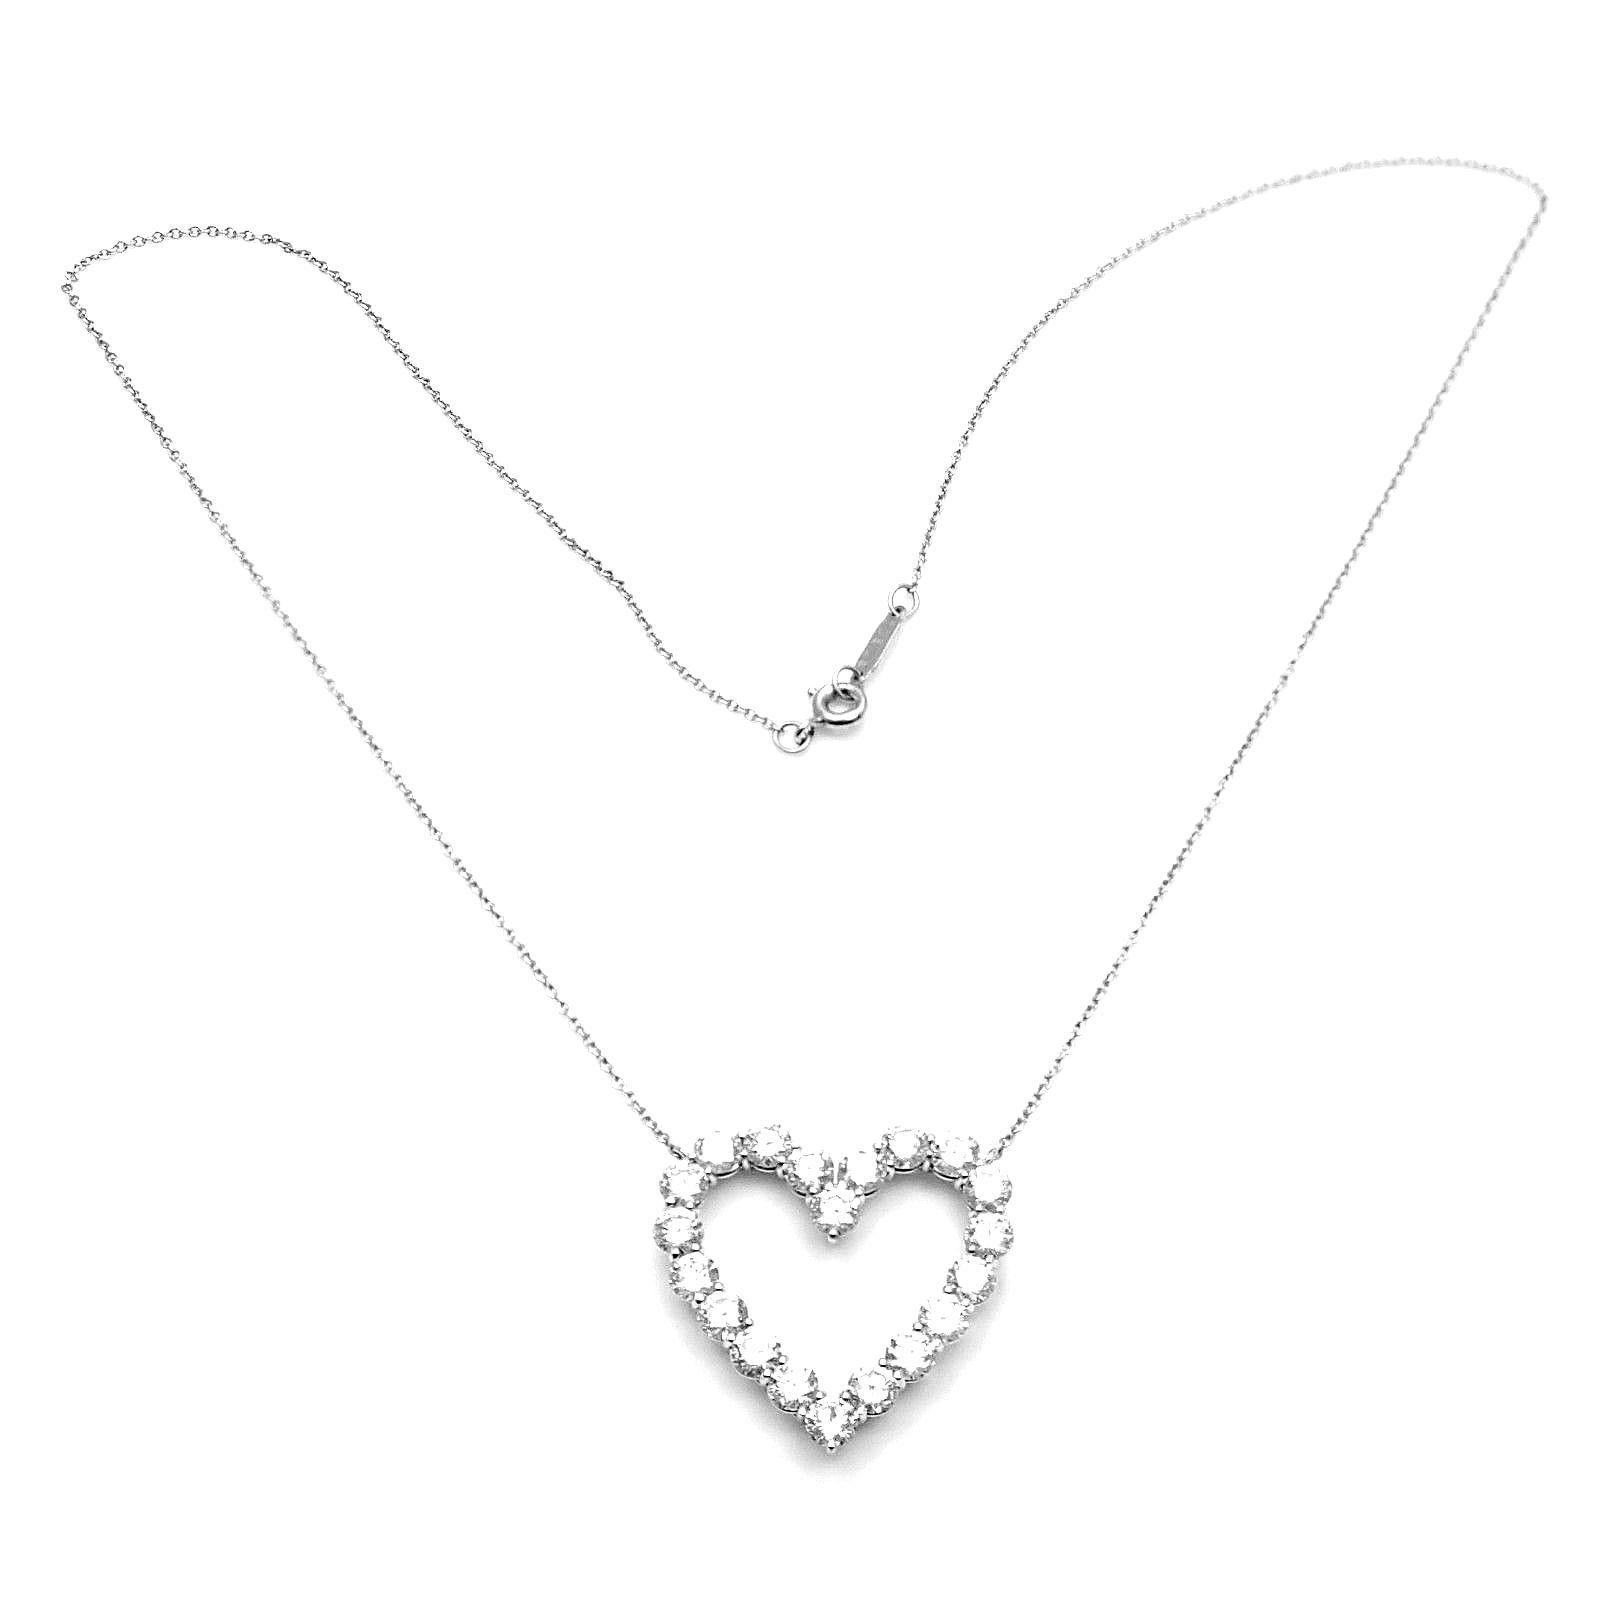 Platinum Diamond Large Heart Necklace by Tiffany & Co.
With 20 Round brilliant cut diamonds VS1 clarity, G color total weight approx. 2.00ct
This necklace comes with Tiffany & Co. box.
Retail Price: $20,000 plus tax.
Details:
Length: 16